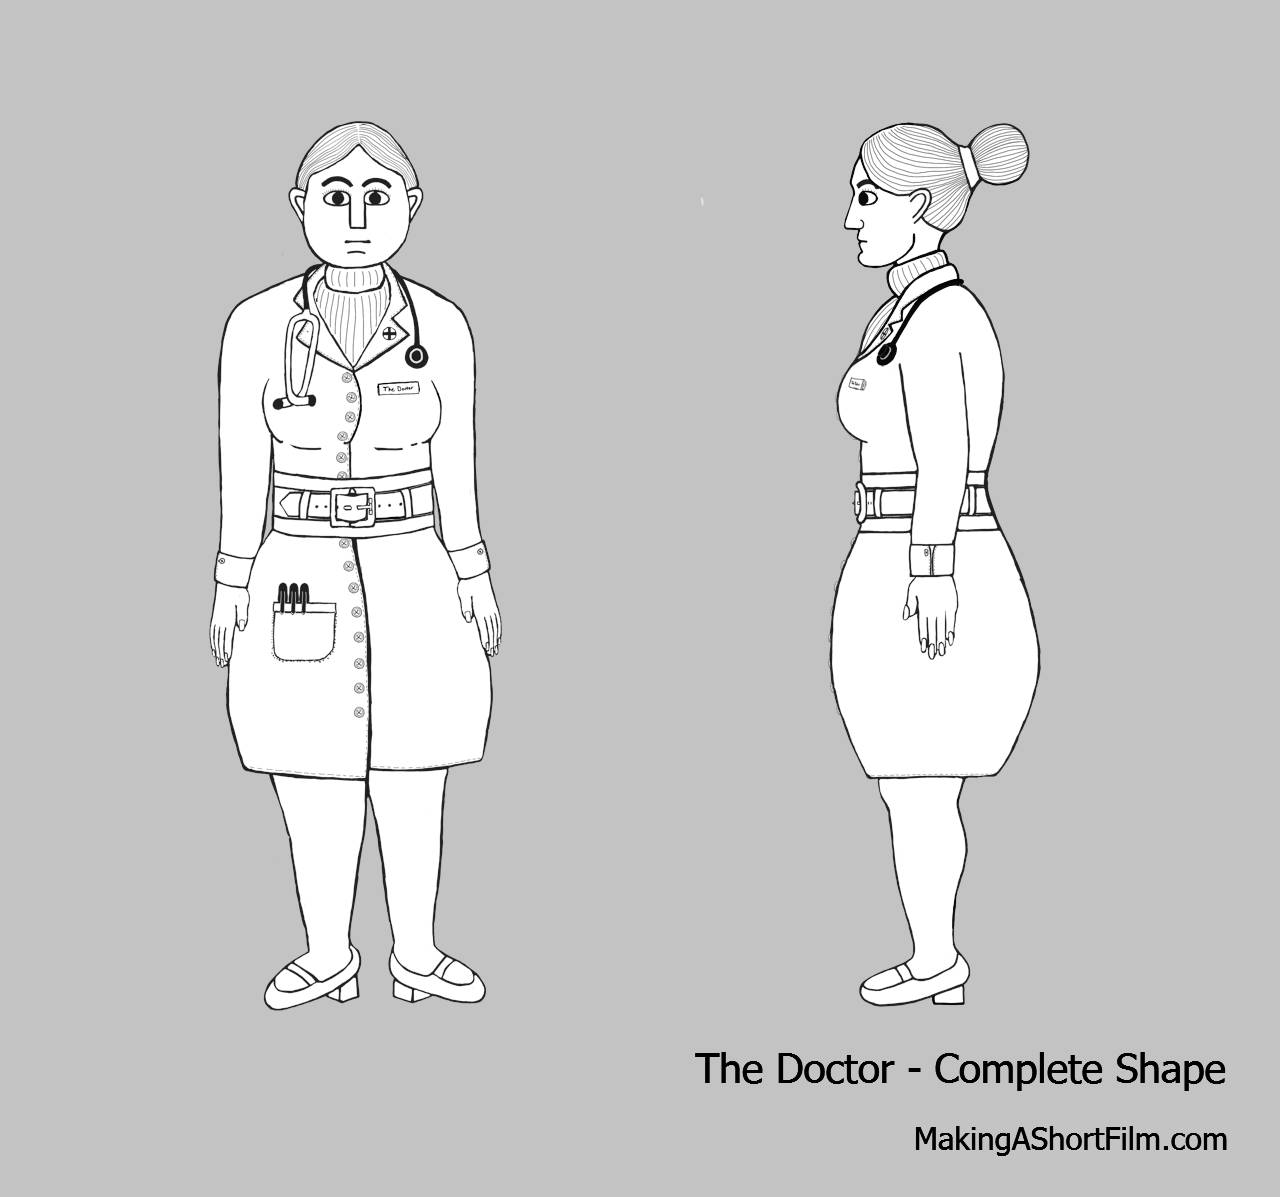 The completed shape of the Doctor